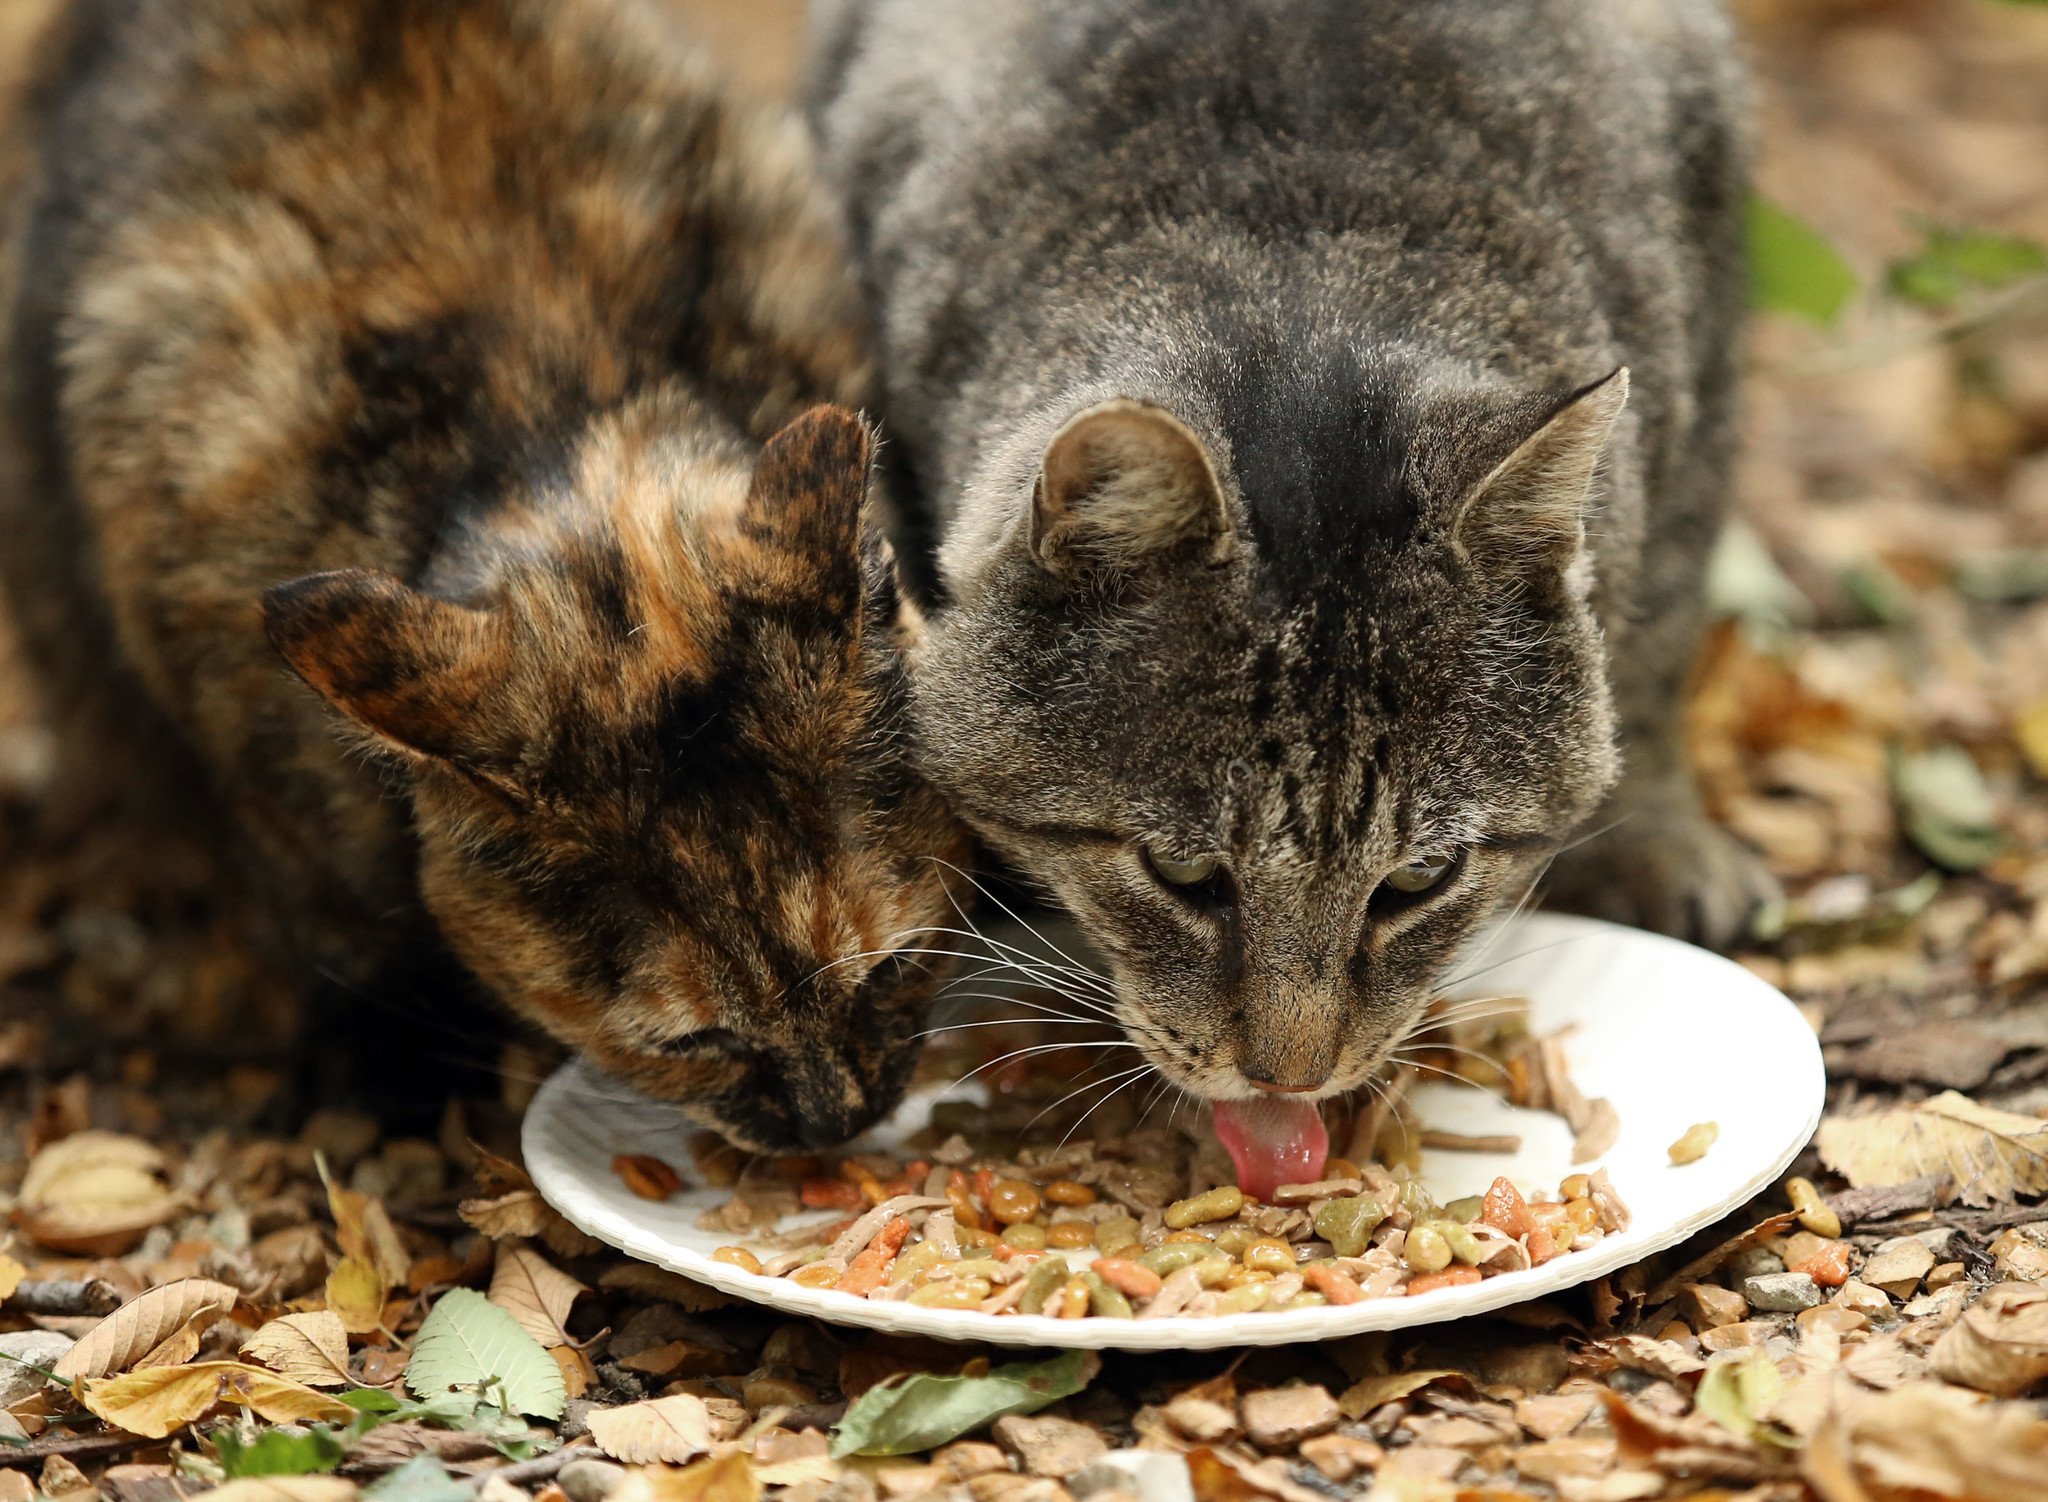 If you feed feral cats, please sterilize them too Carroll County Times